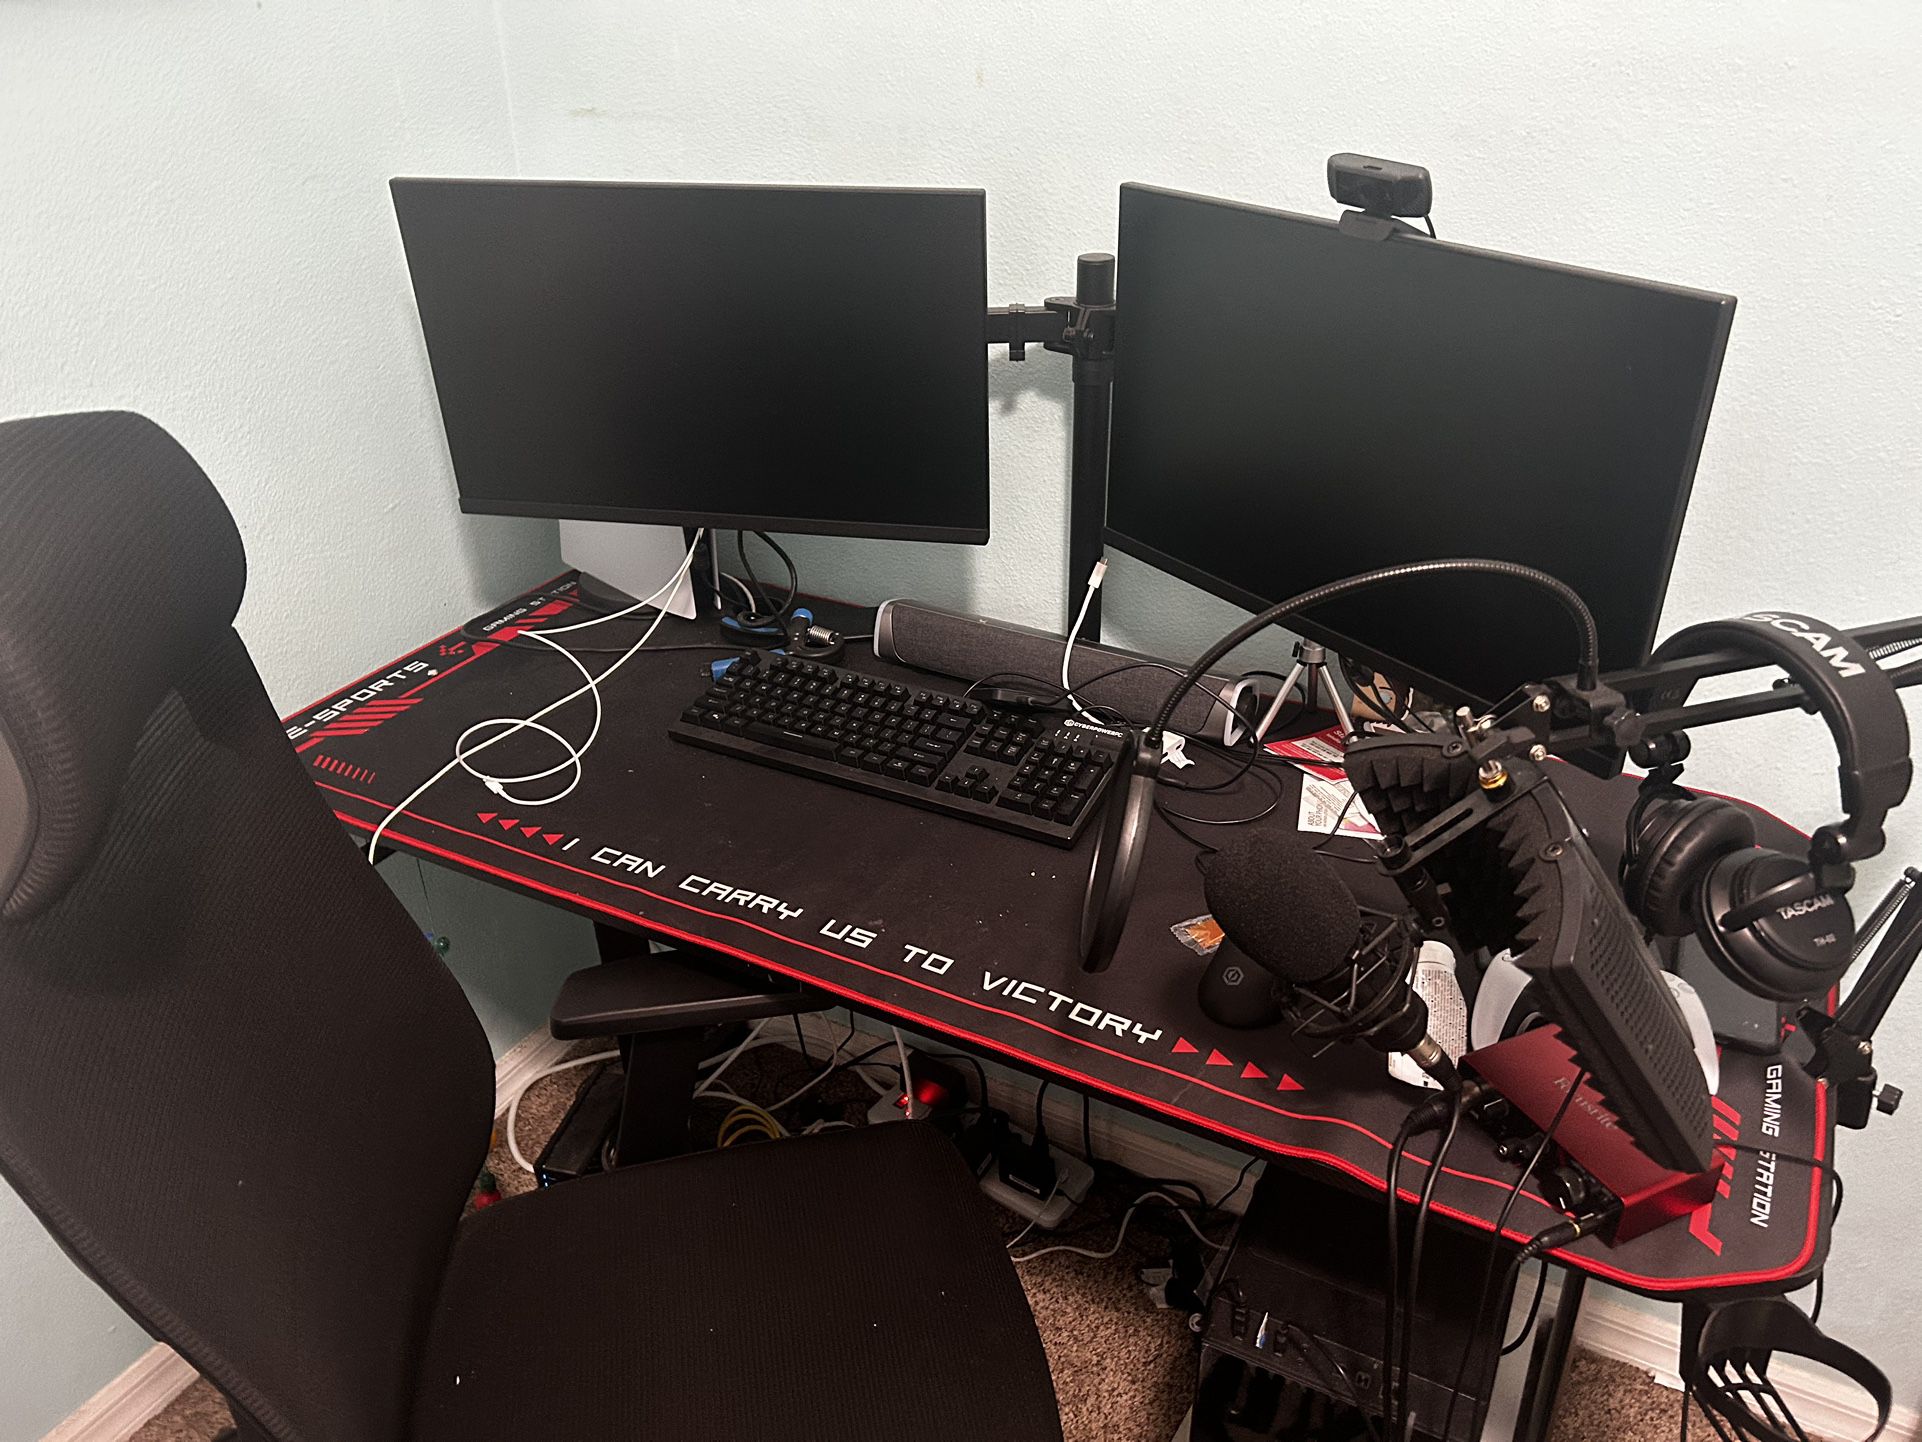 Full PC Setup For Sale (negotiations Welcomed)